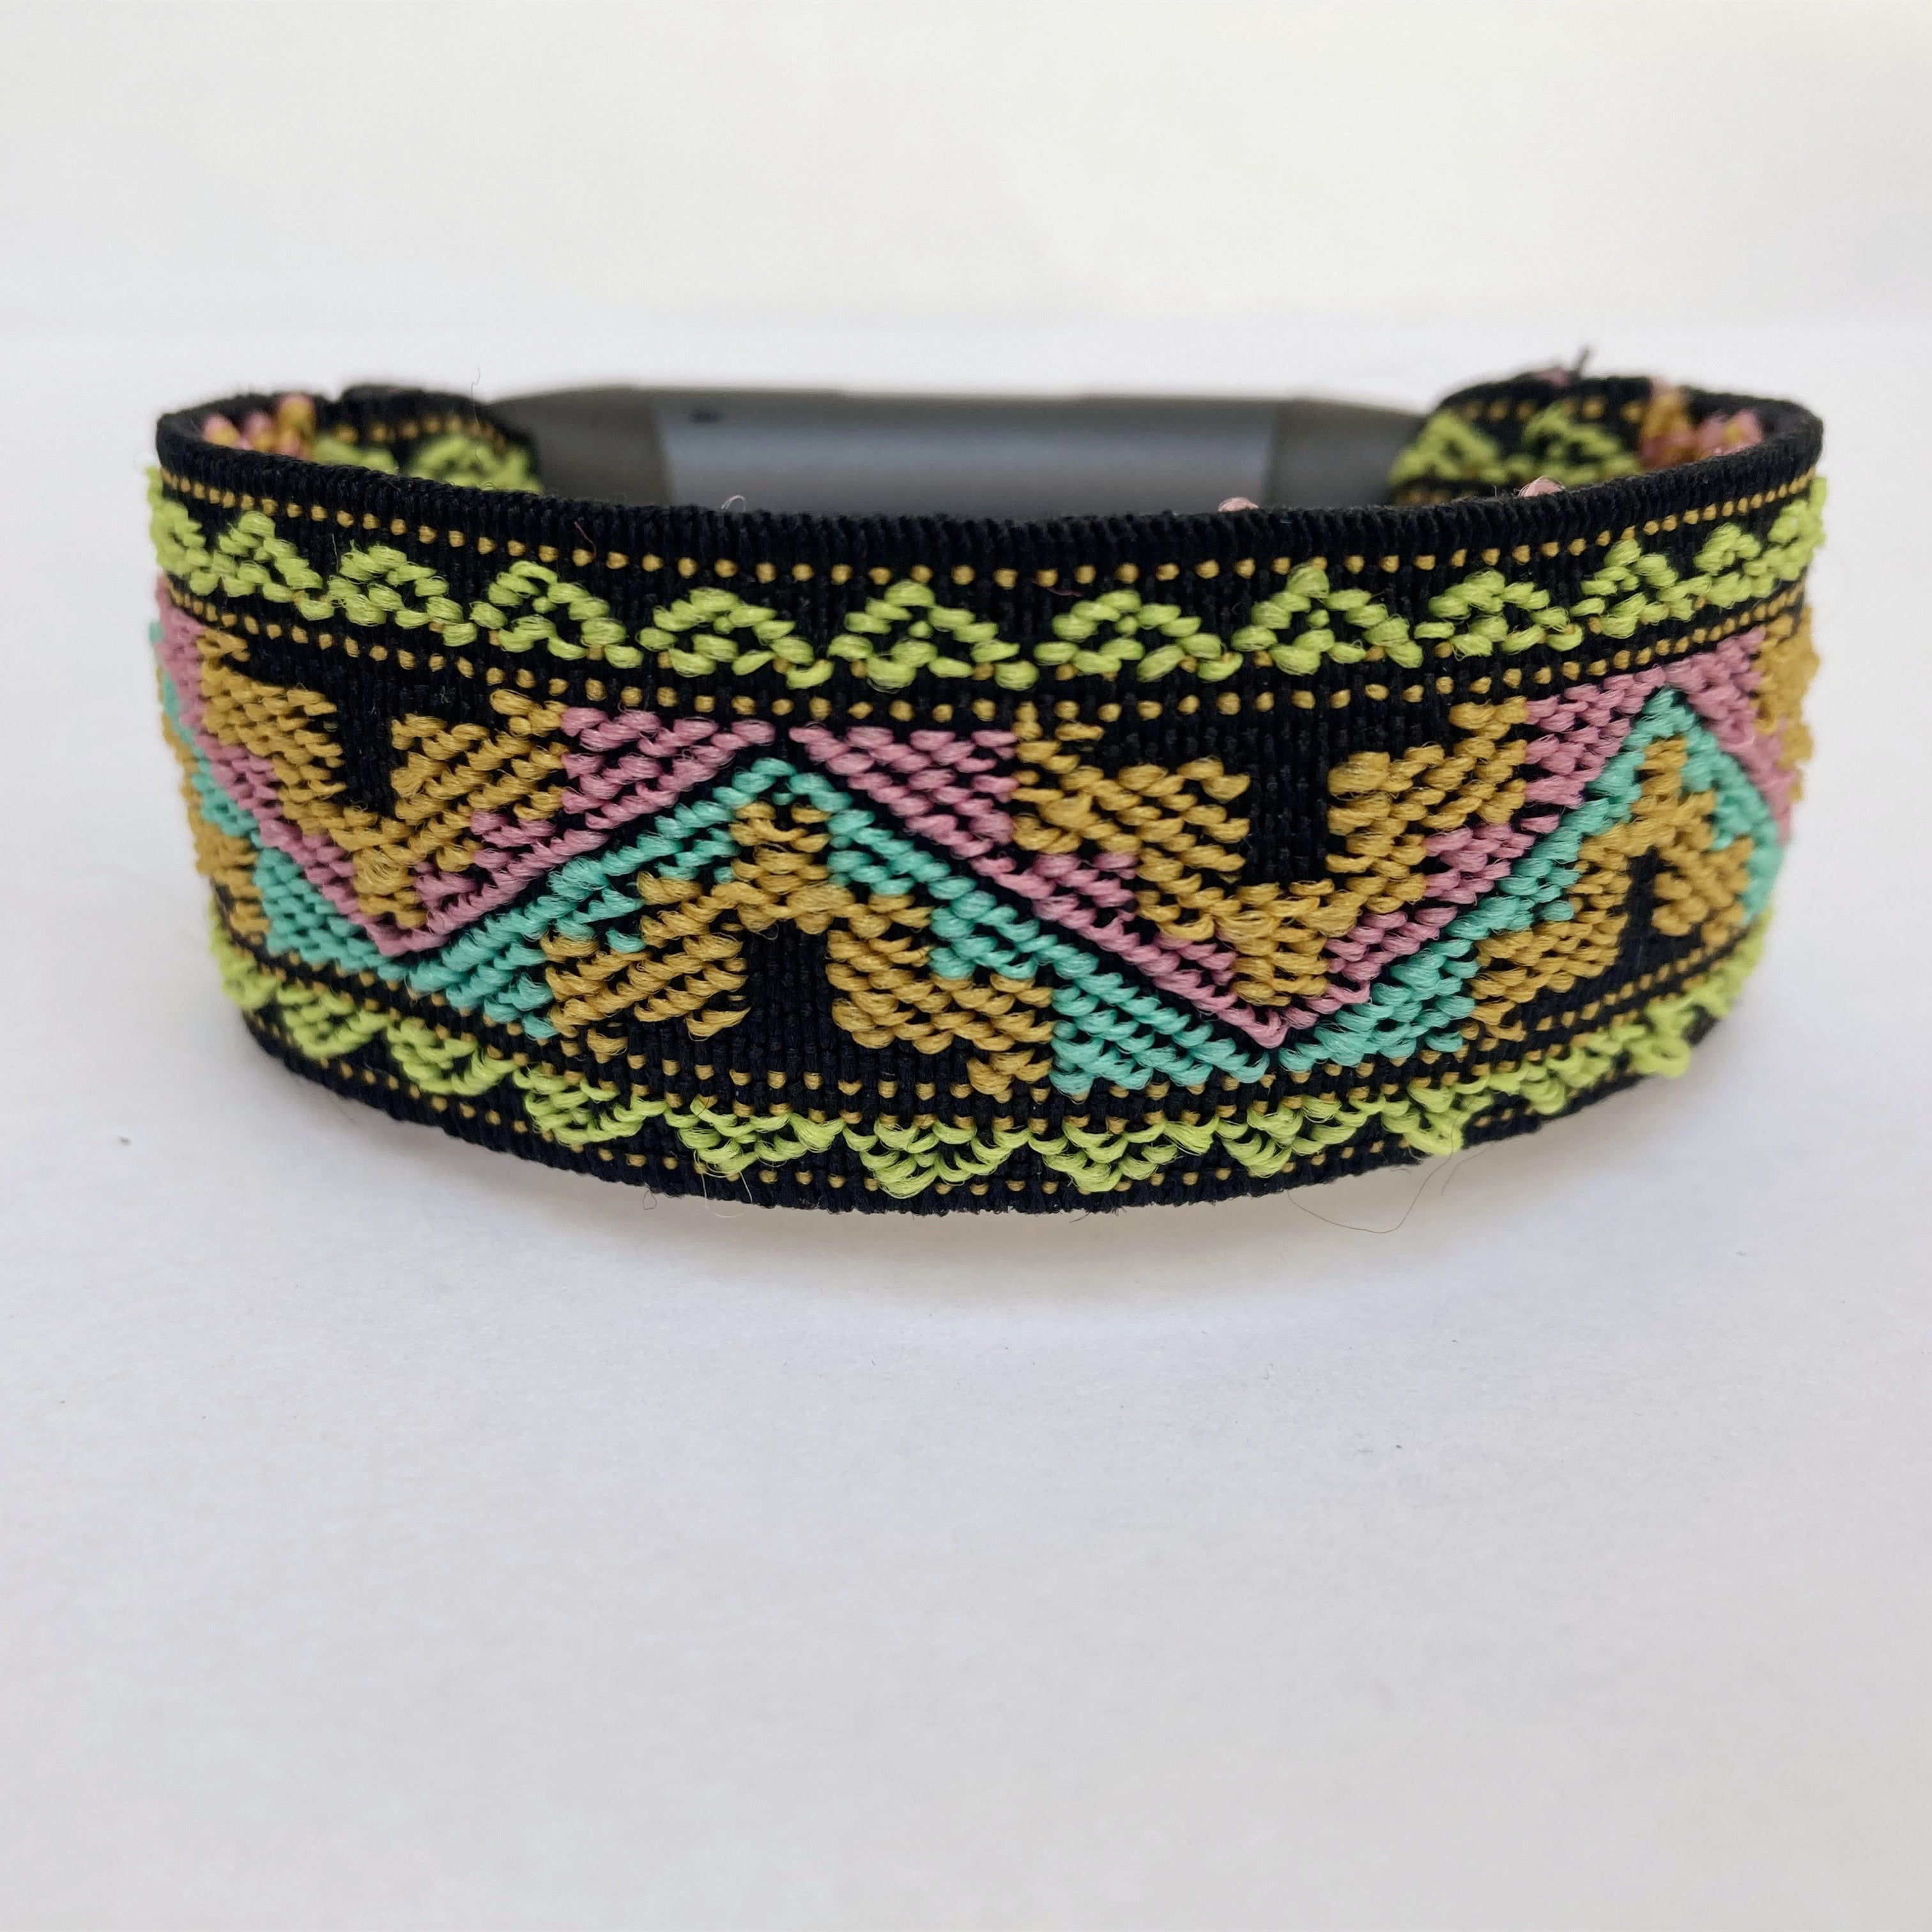 Elastic band for Fitbit charge 3 / 4 bands Handmade Customized Charge –  Luna Watch Bands